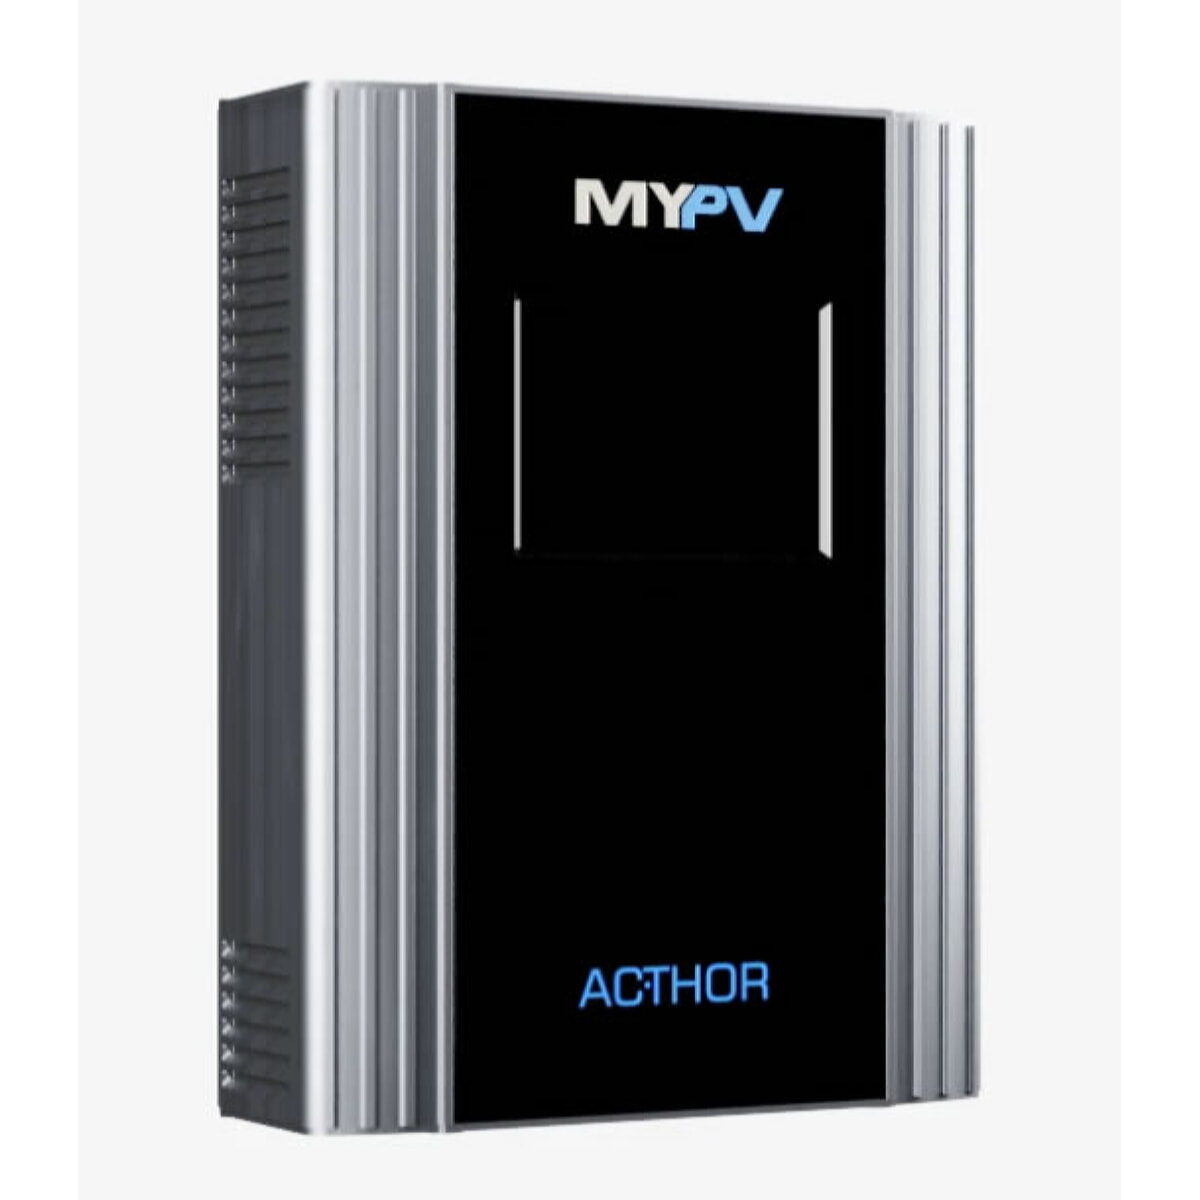 my-PV photovoltaic power manager AC THOR 9s